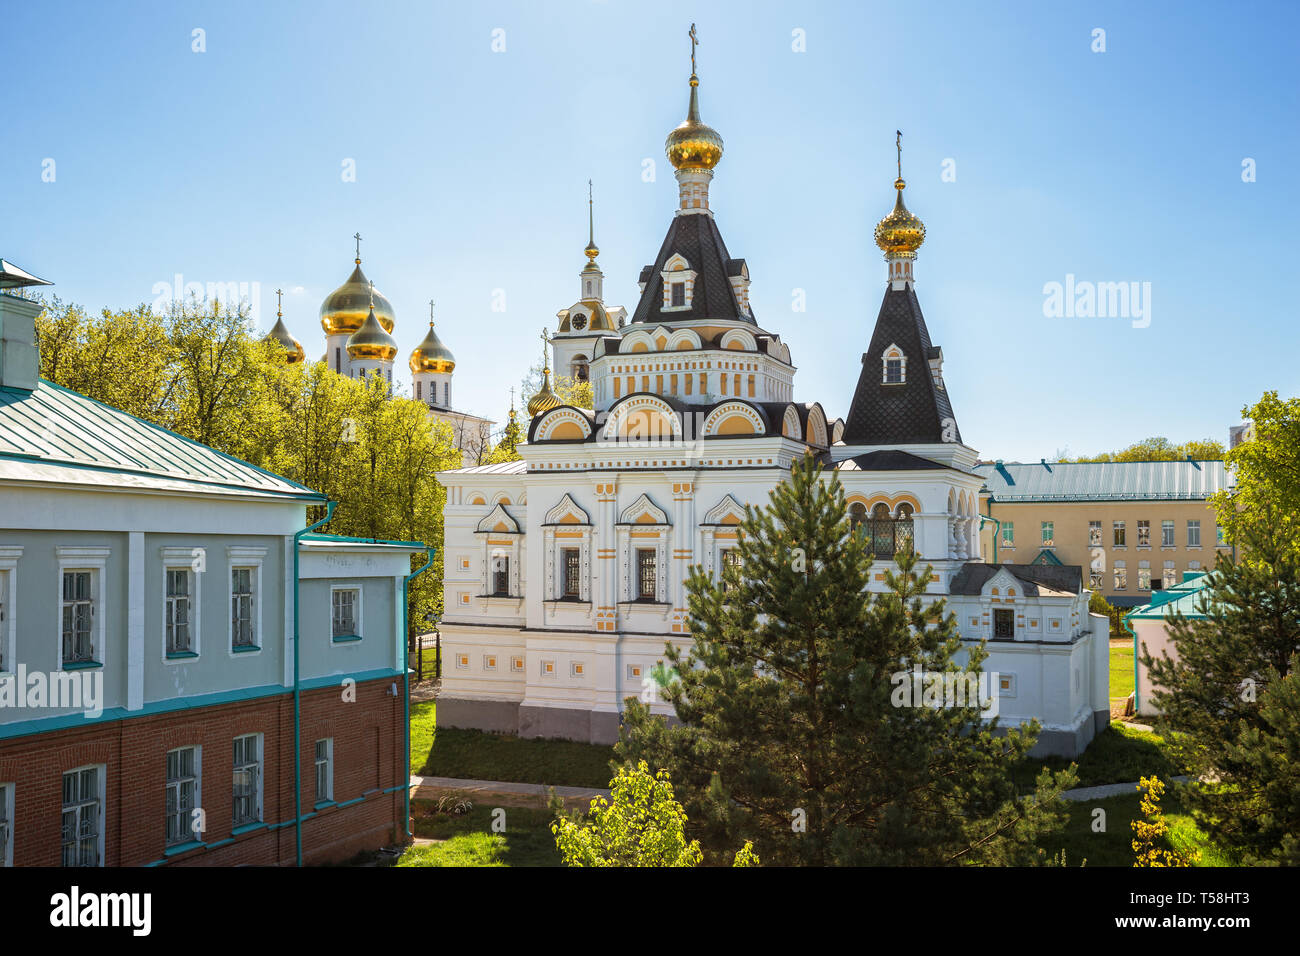 Two ancient temples Elizabethan Church and Assumption Cathedral in Kremlin of Dmitrov city, Moscow Region, Russia Stock Photo